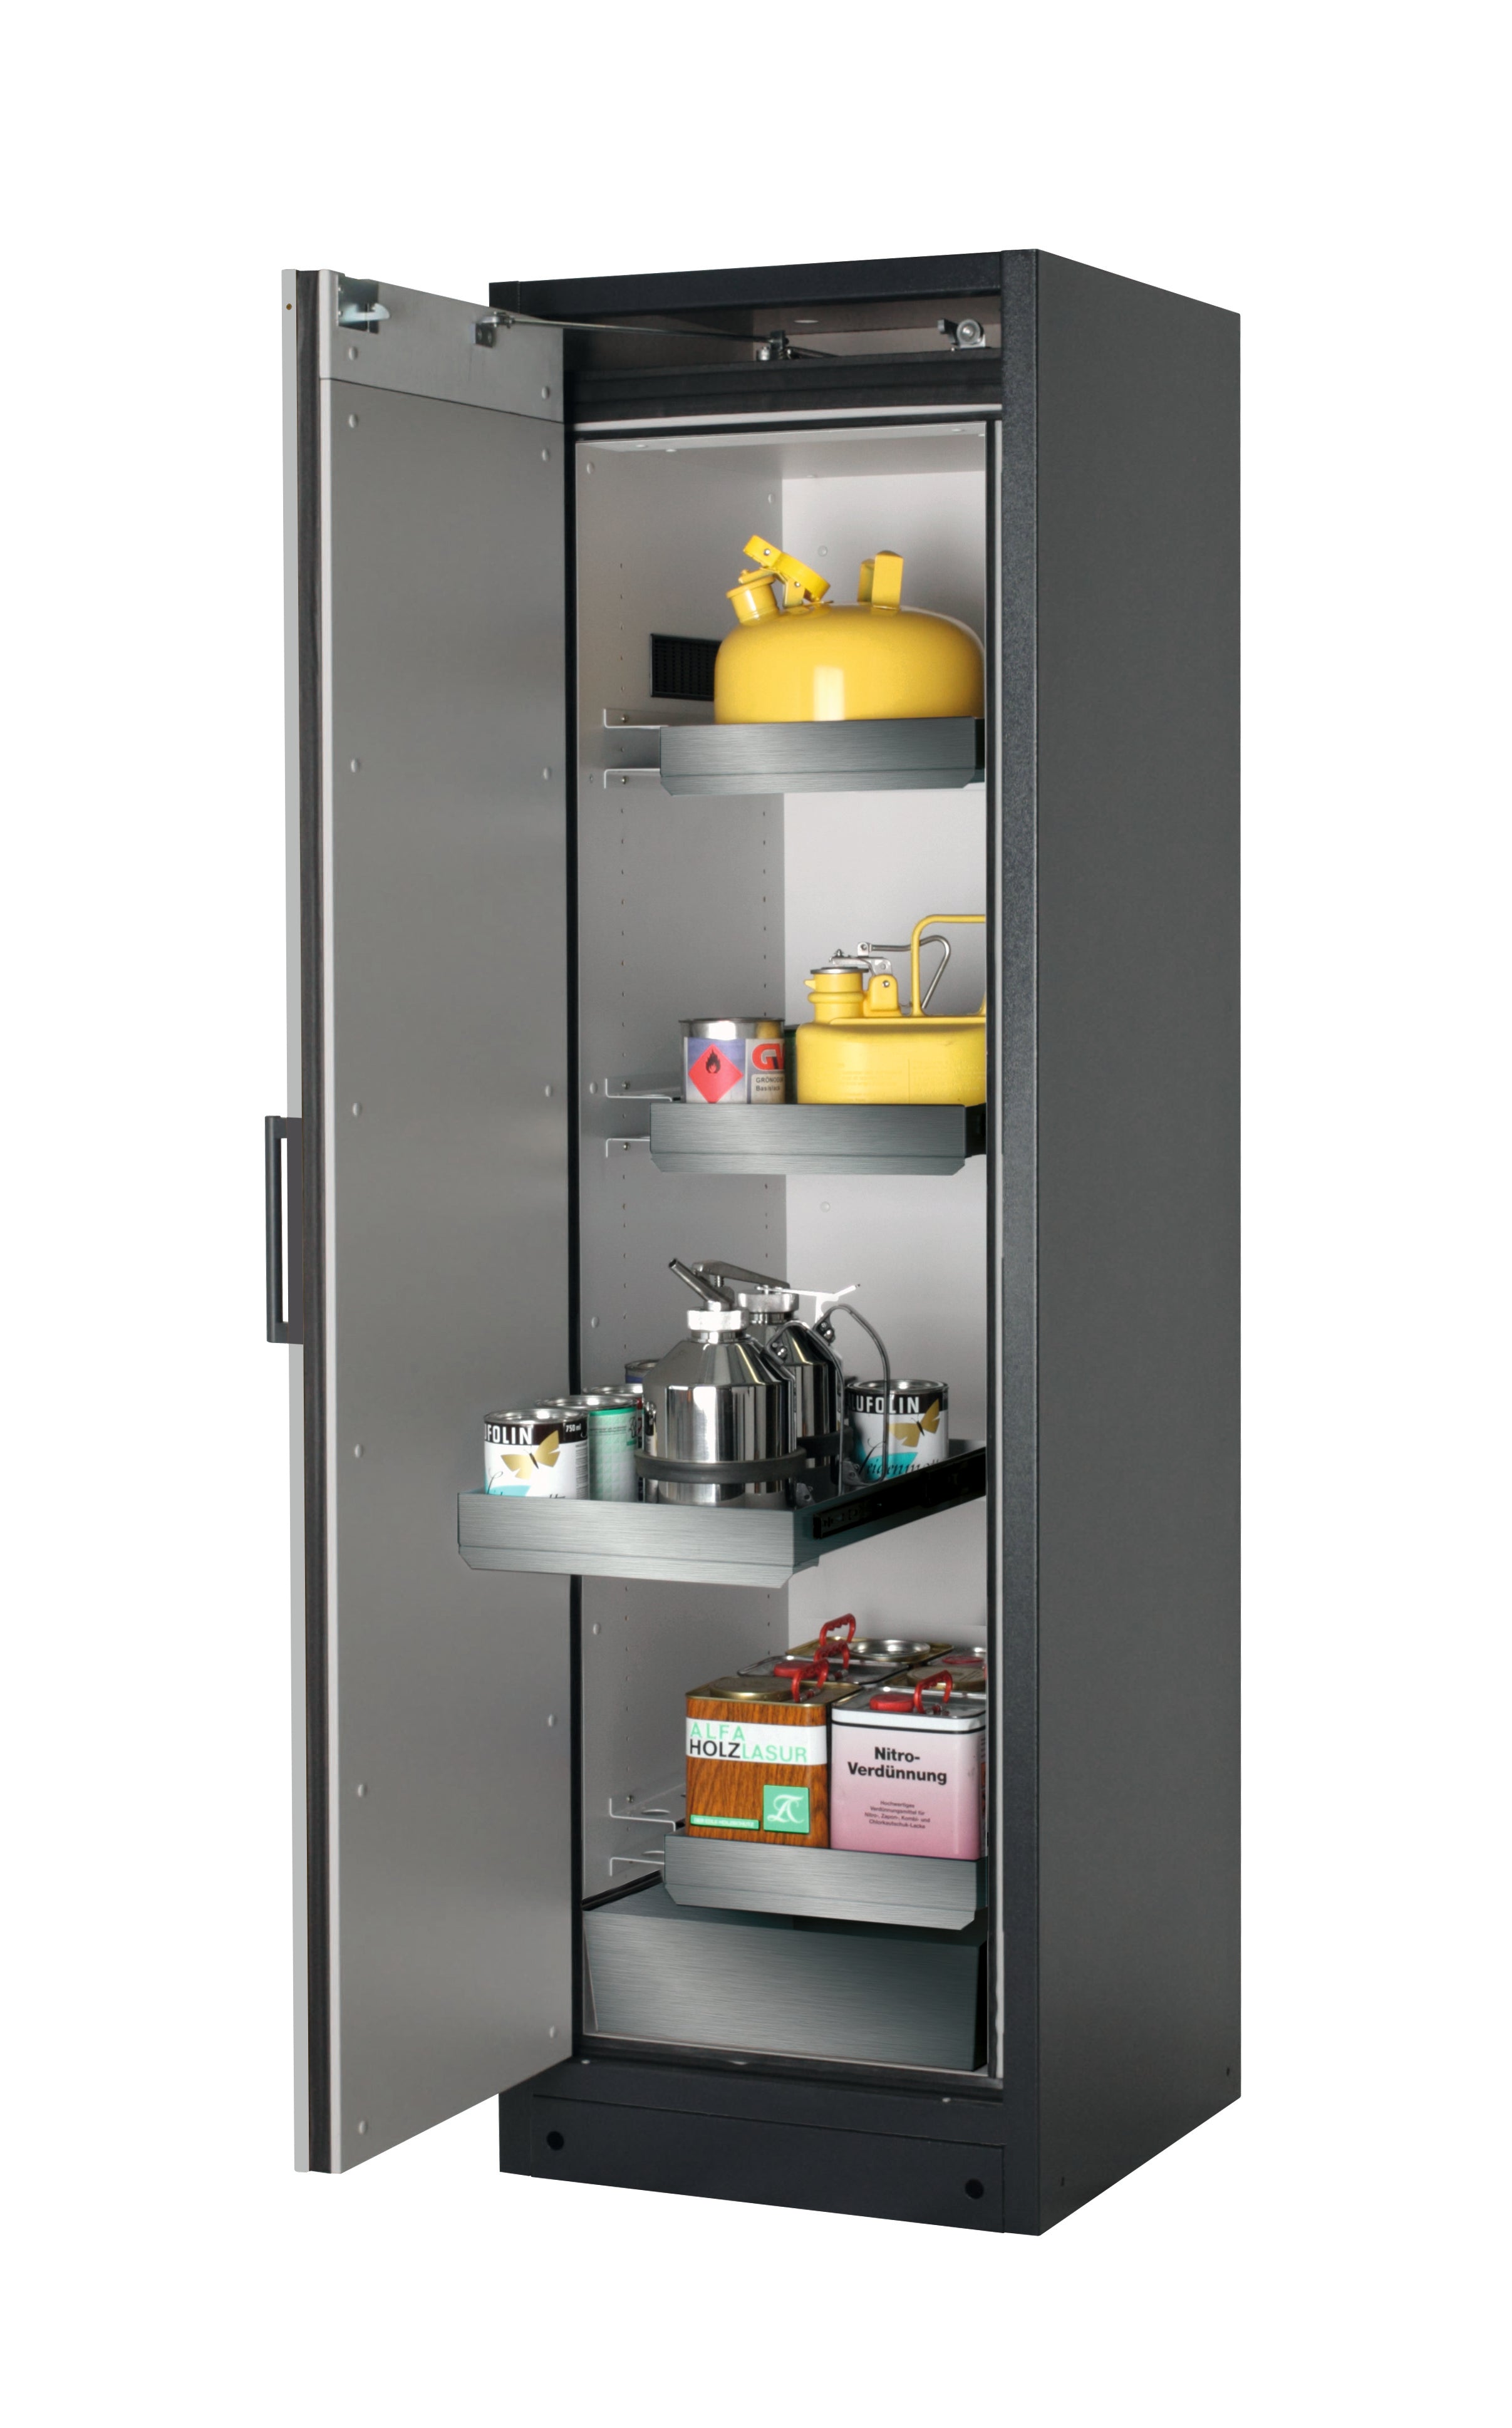 Type 90 safety storage cabinet Q-PEGASUS-90 model Q90.195.060.WDAC in pure white RAL 9010 with 3x drawer (standard) (stainless steel 1.4301),